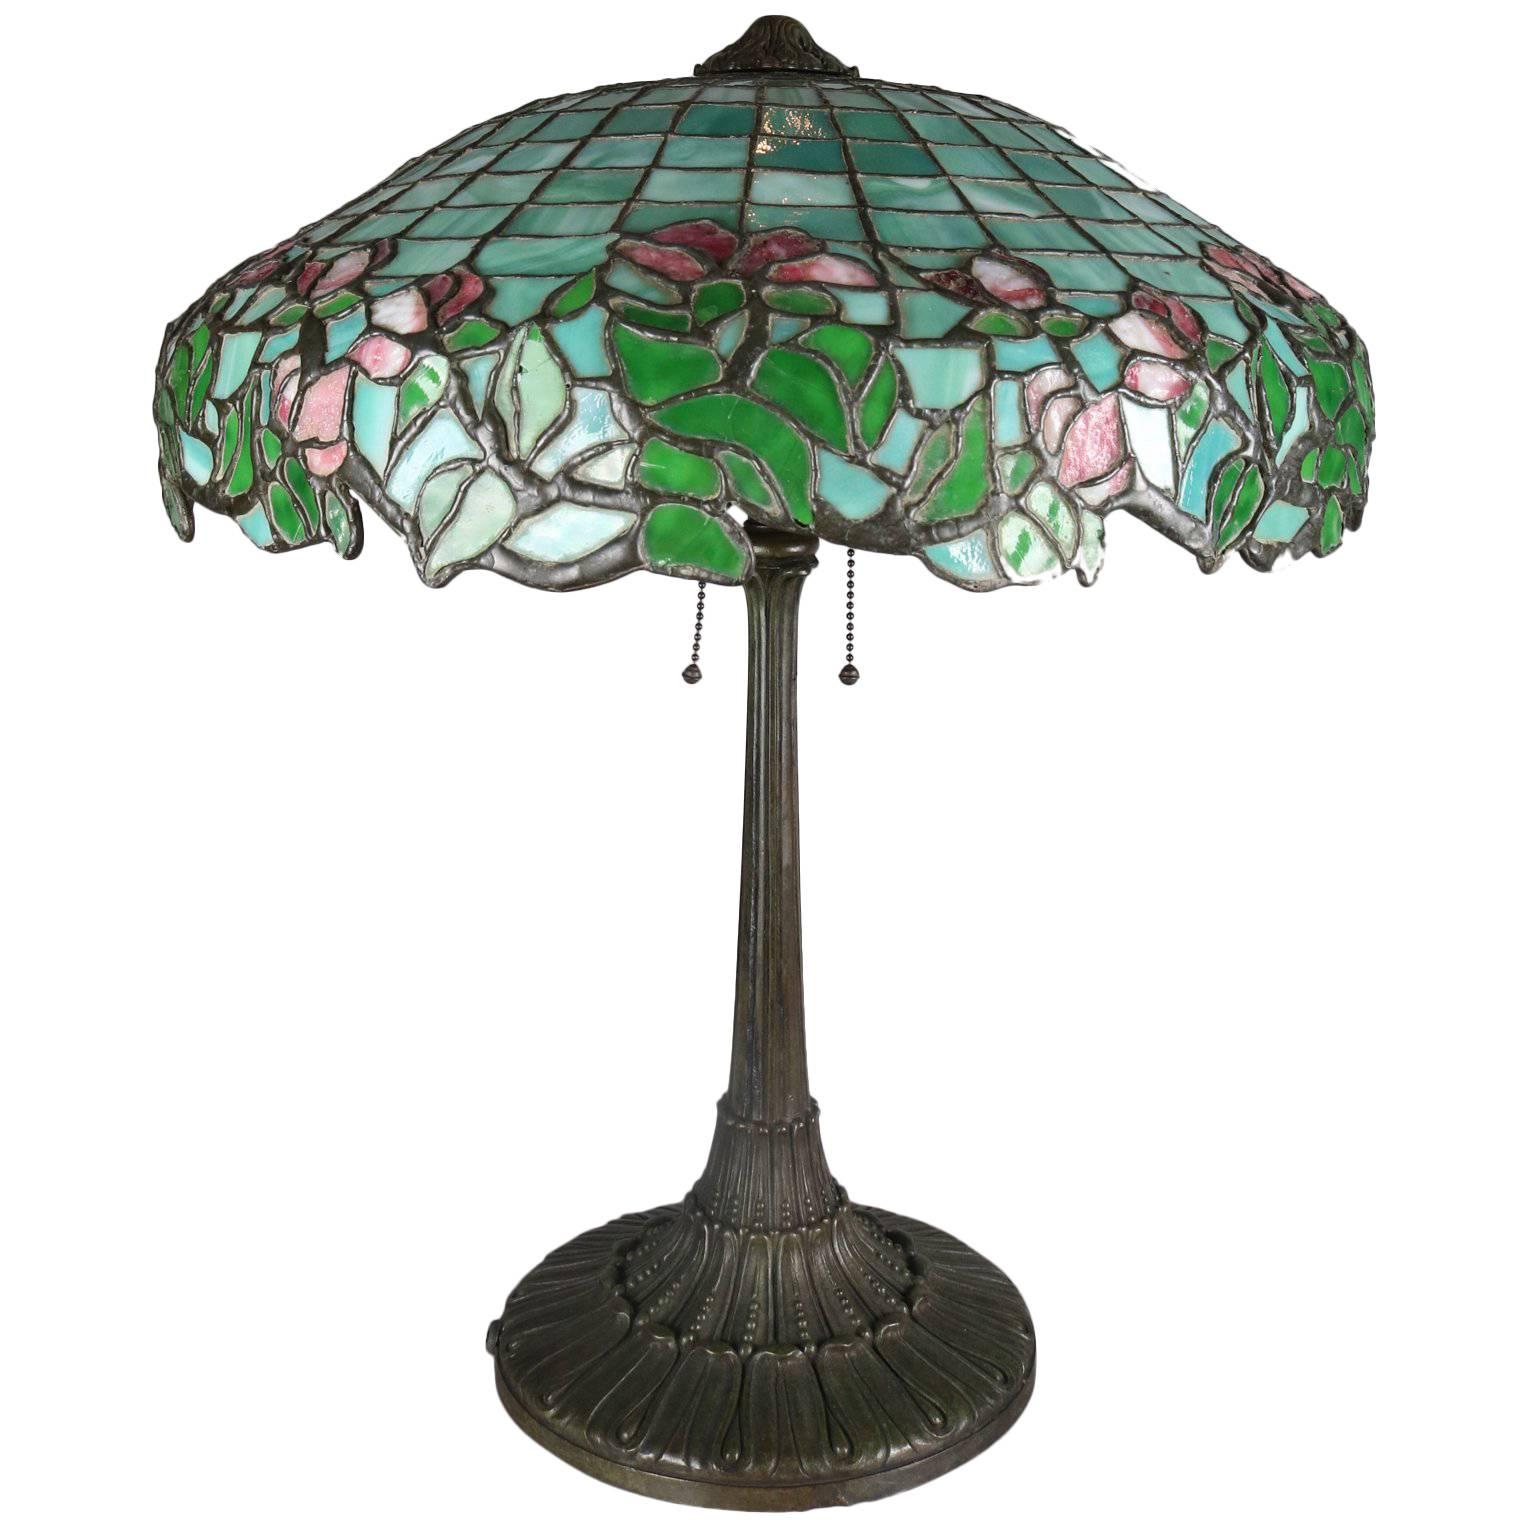 Antique Gorham Art Nouveau Mosaic Leaded Stained Glass Lamp, Rose and Petal